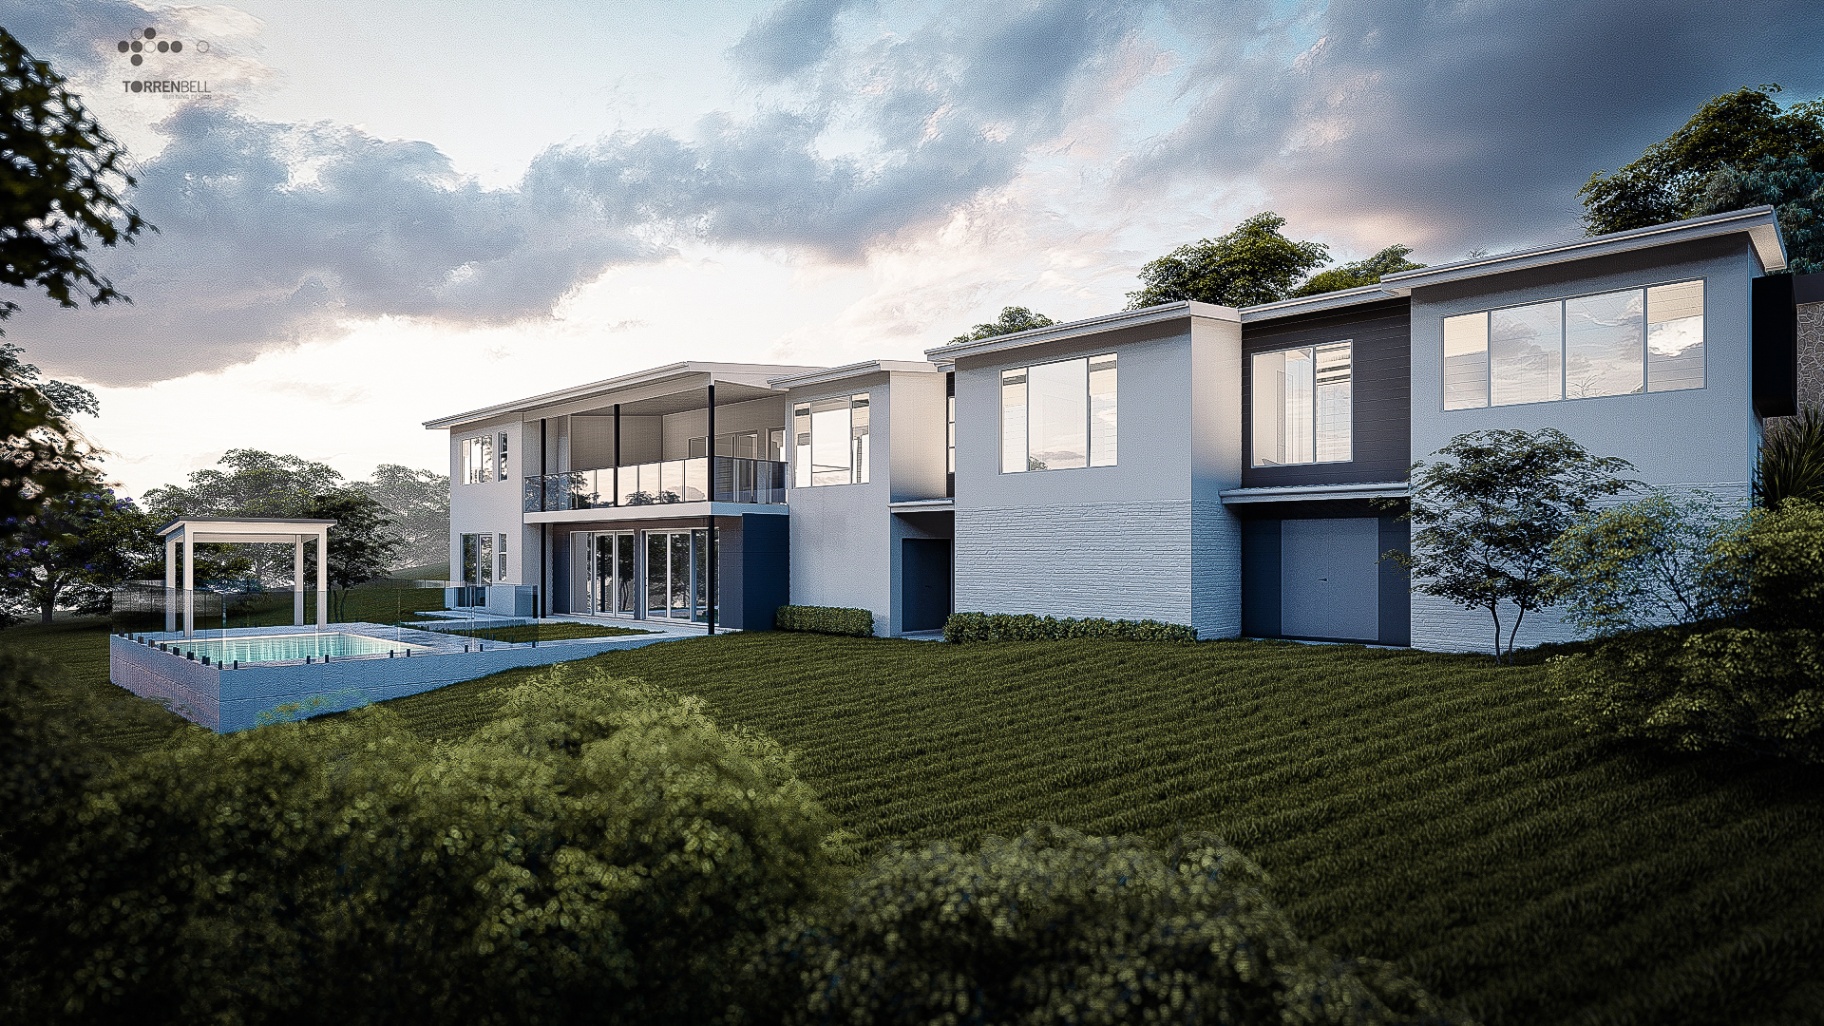 New Home Extension - Builder Gold Coast